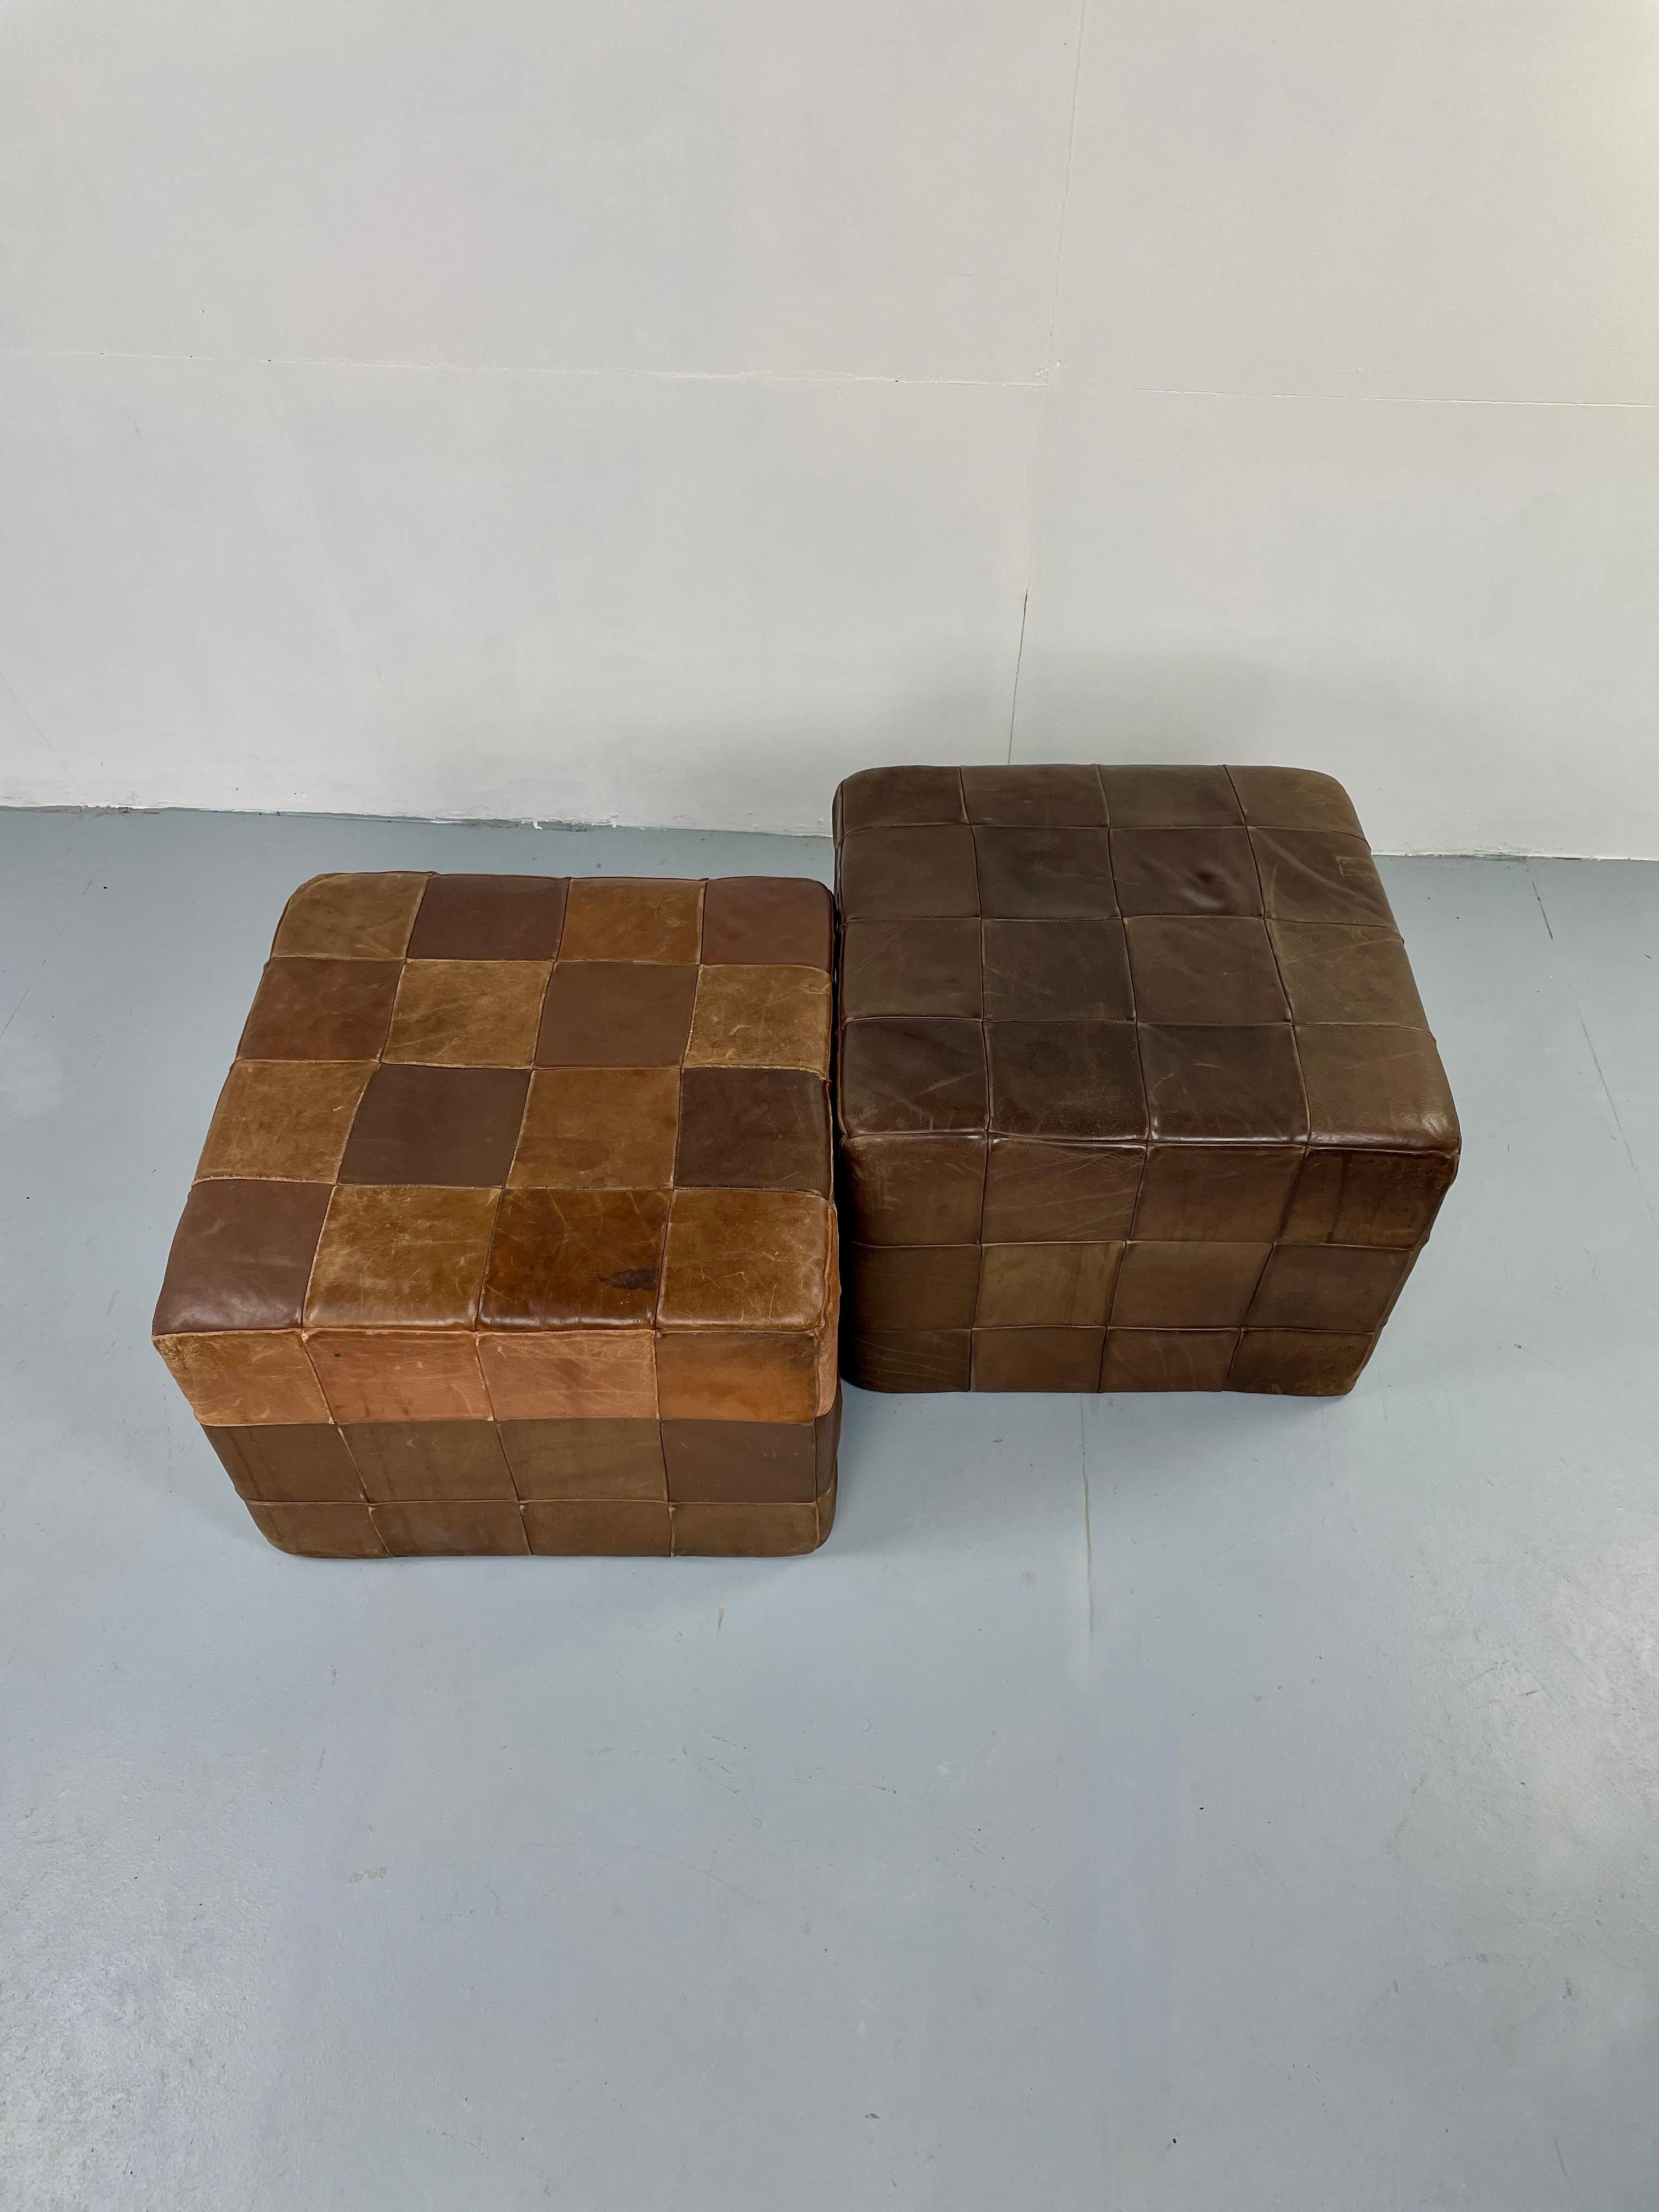 Hand-Crafted Vintage De Sede Brown Patchwork Leather Pouf, Ottoman, Switzerland DeSede Patina